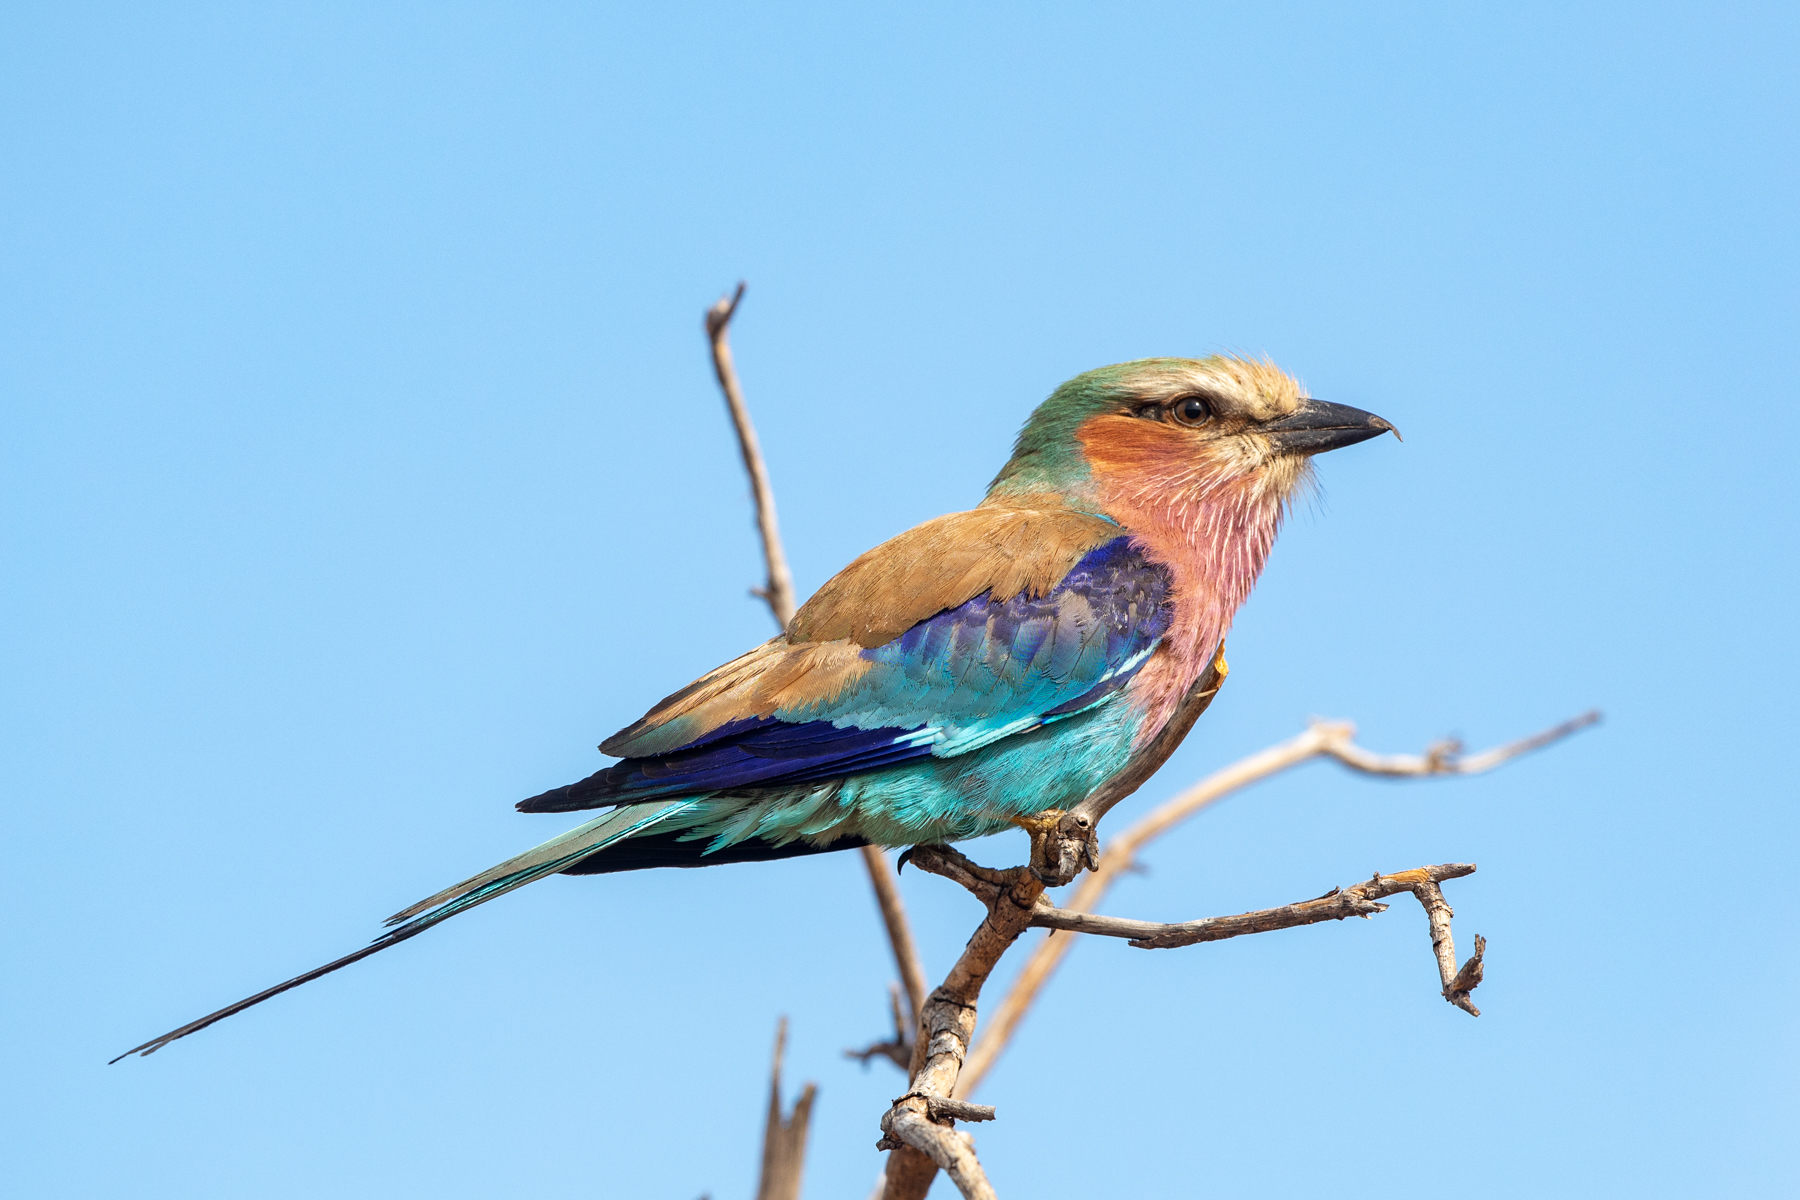 The Lilac-breasted Roller is a truly stunning bird